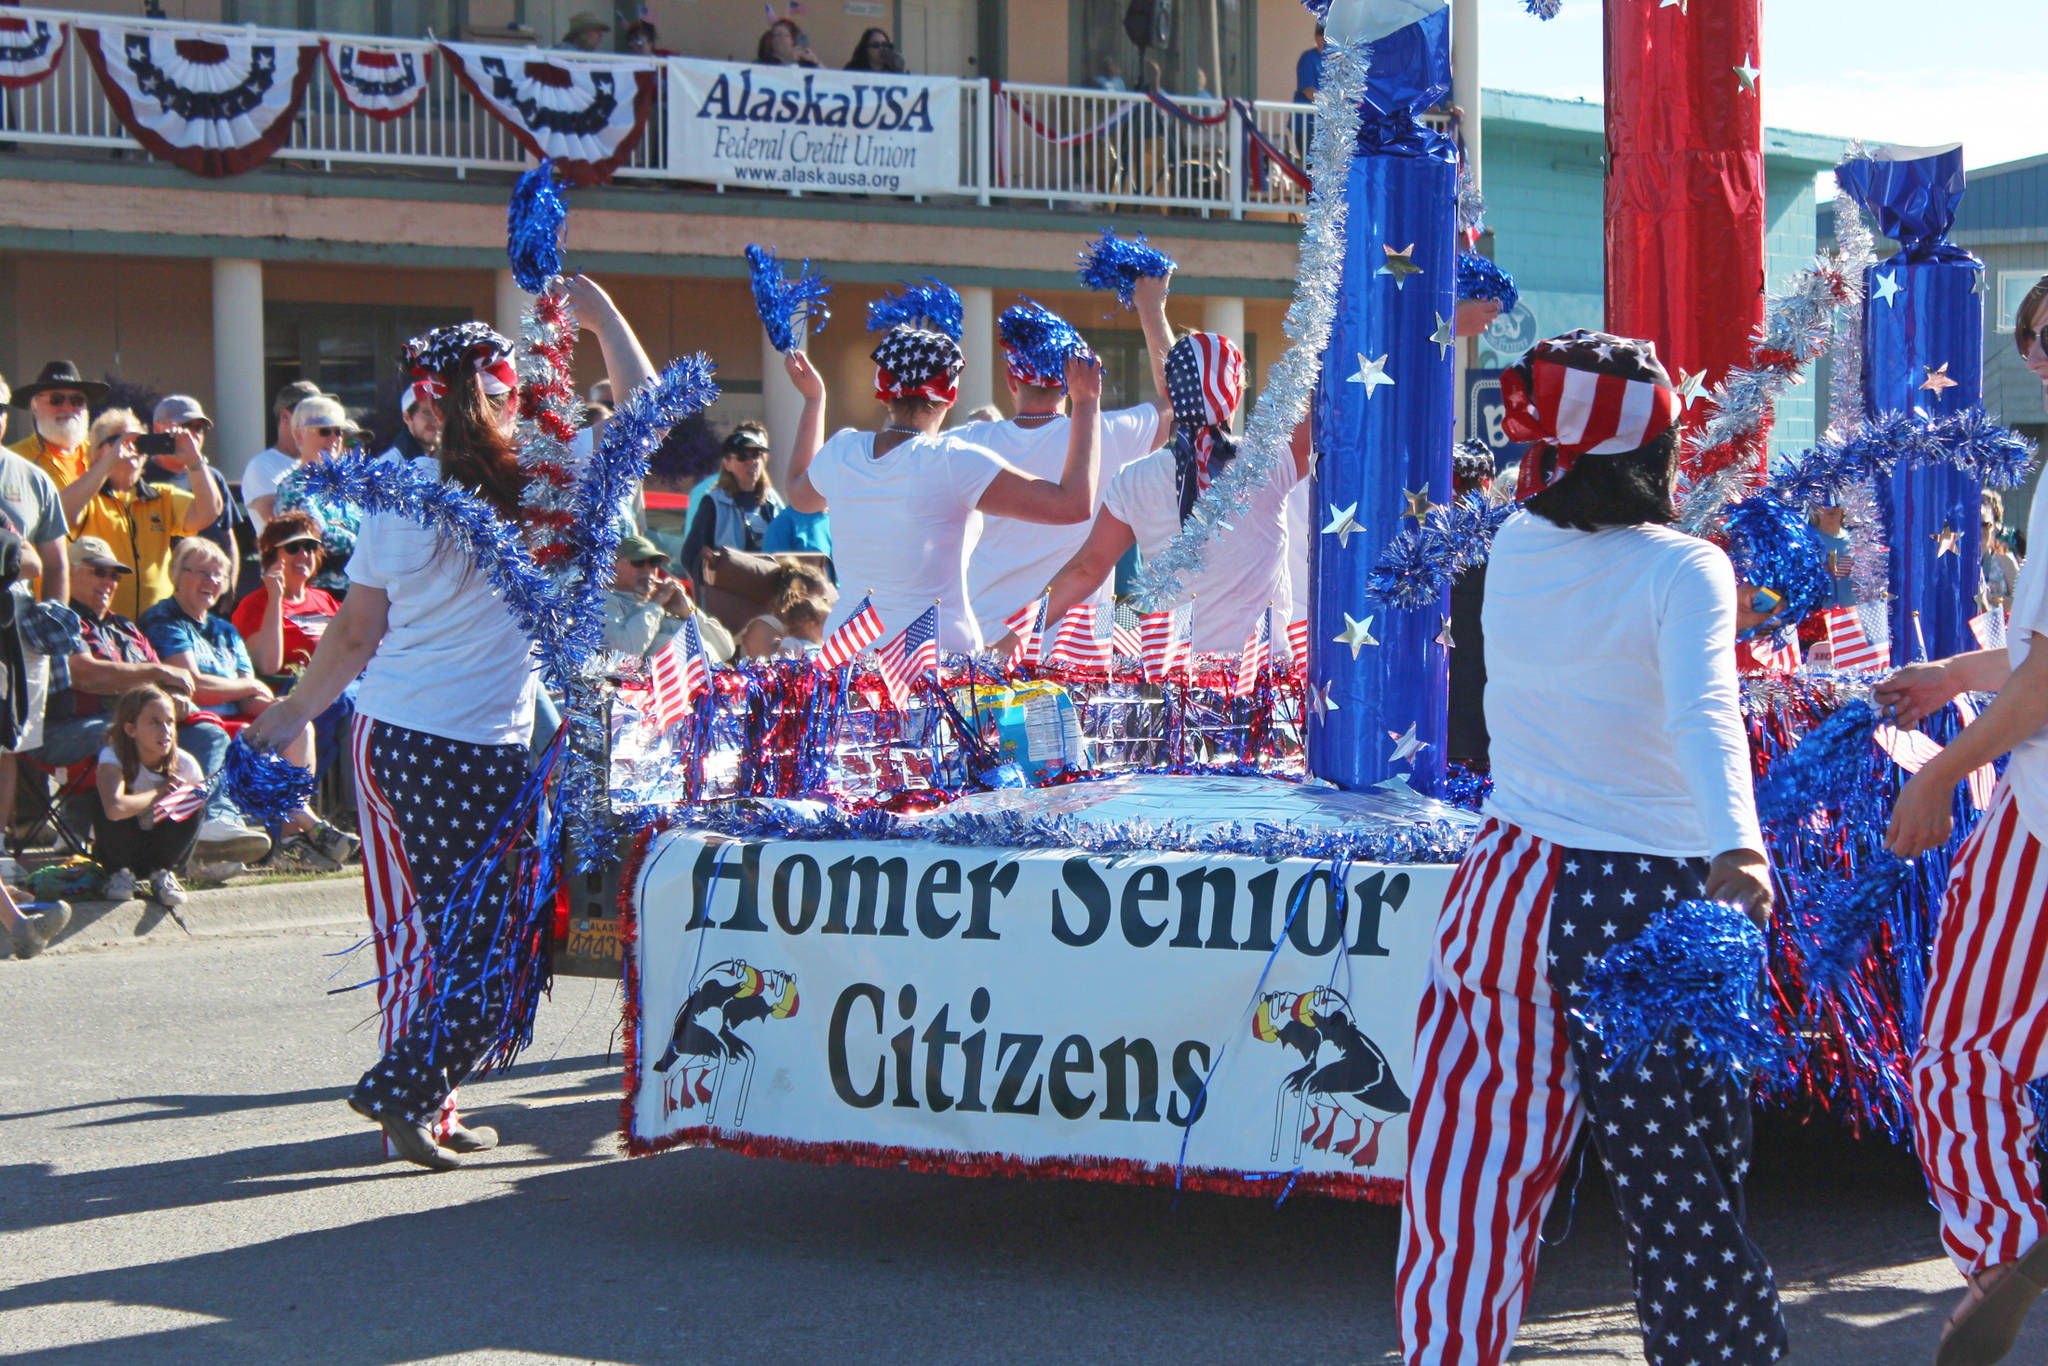 Representatives of the Homer Senior Citizens Center march and dance in this year’s Independence Day parade Wednesday, July 4, 2018 in Homer, Alaska. (Photo by Megan Pacer/Homer News)